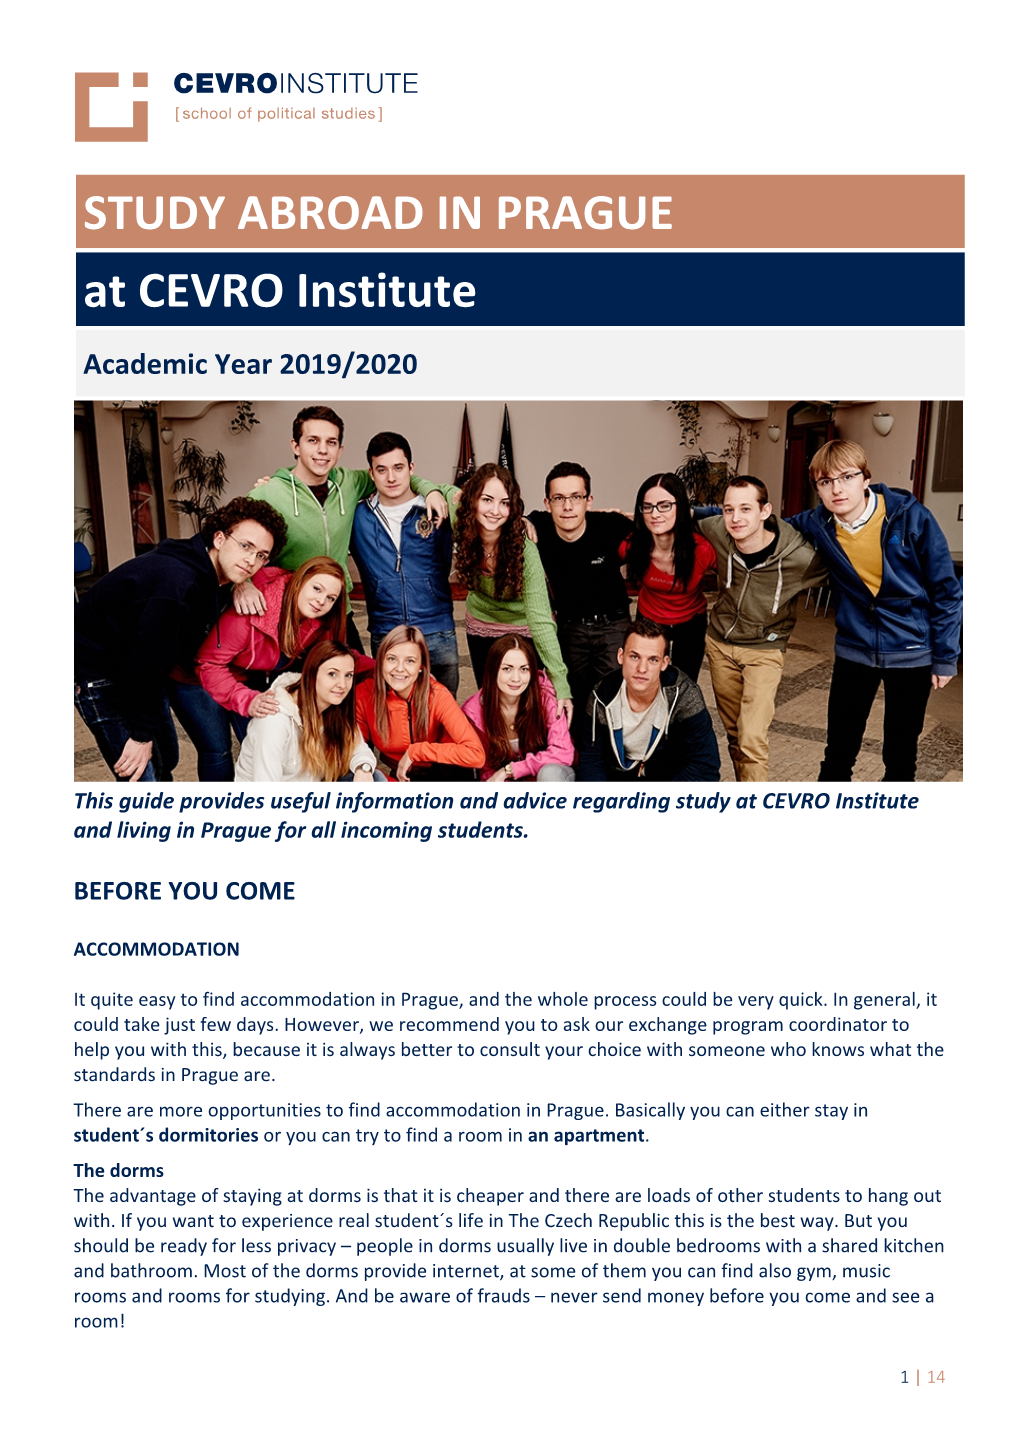 STUDY ABROAD in PRAGUE at CEVRO Institute Academic Year 2019/2020